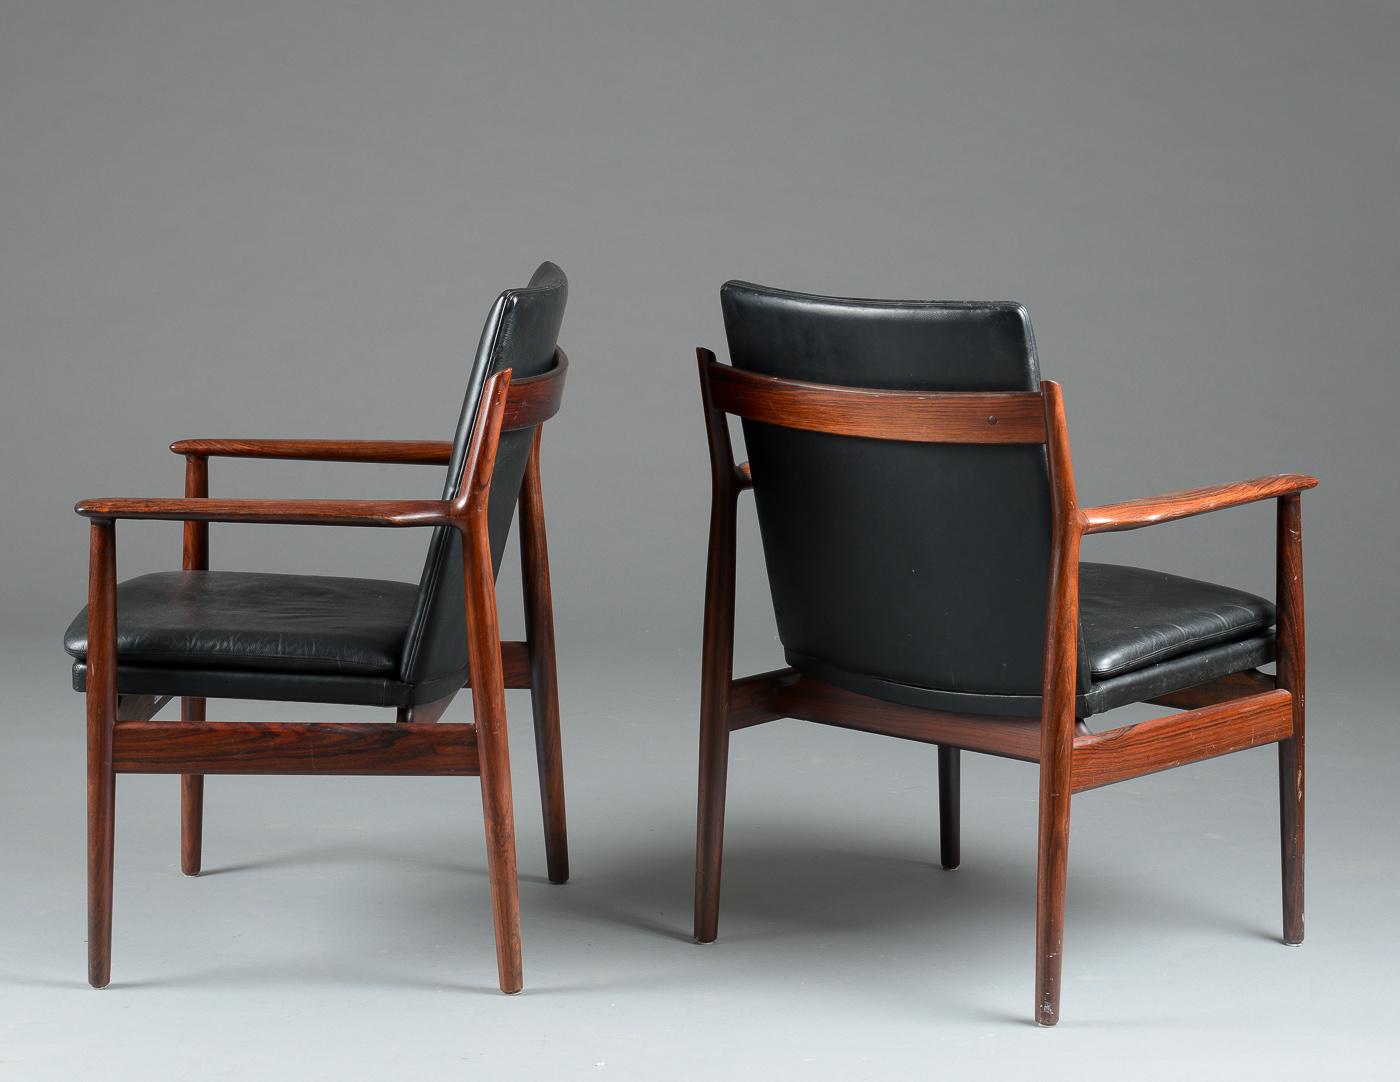 Danish Arne Vodder Armchair with Original Black Leather, circa 1960s For Sale